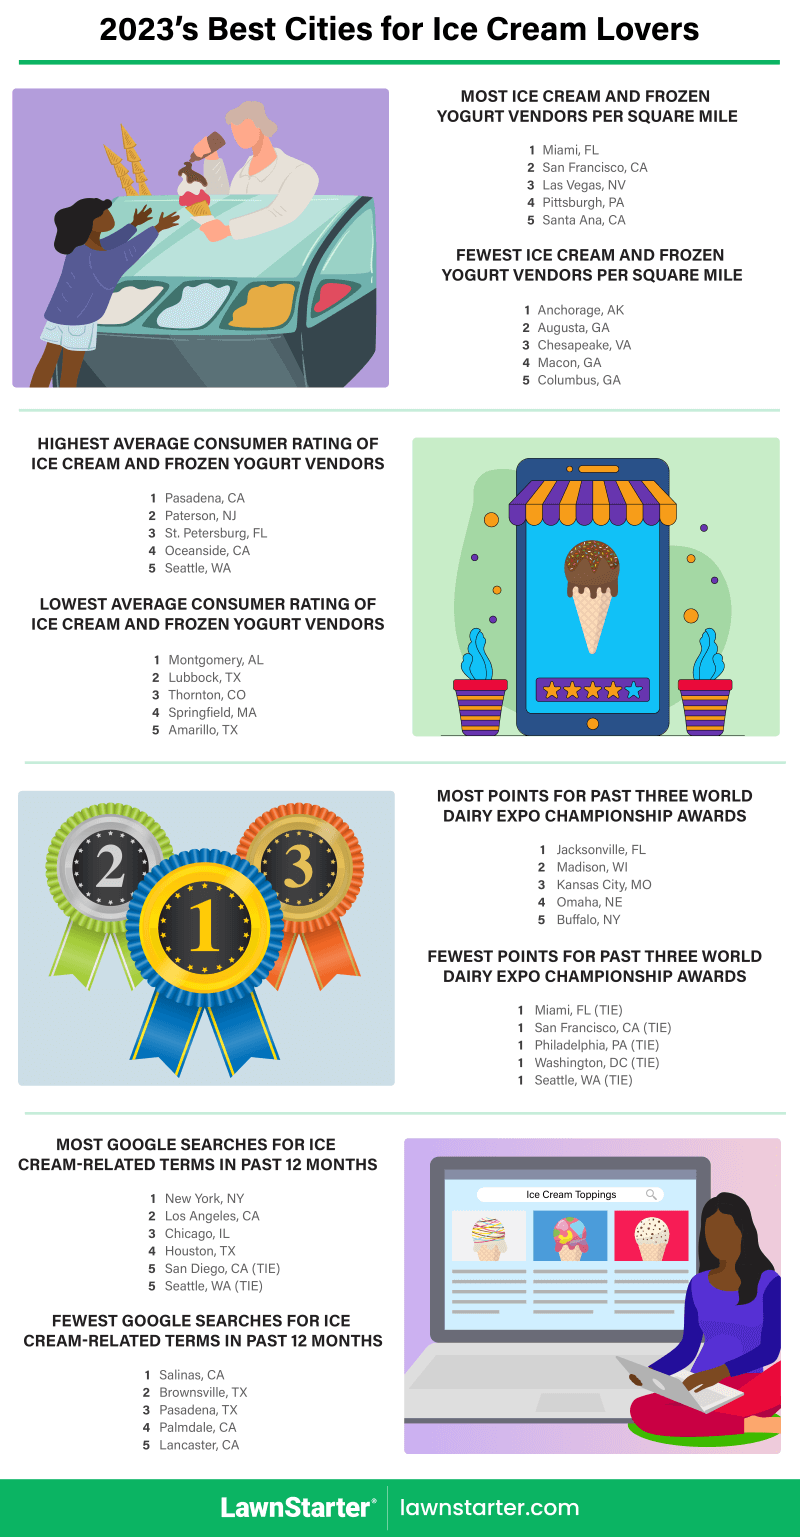 Infographic showing the Best Cities for Ice Cream Lovers, a ranking based on access to ice cream, froyo, and gelato, consumer ratings, ice cream awards, and more